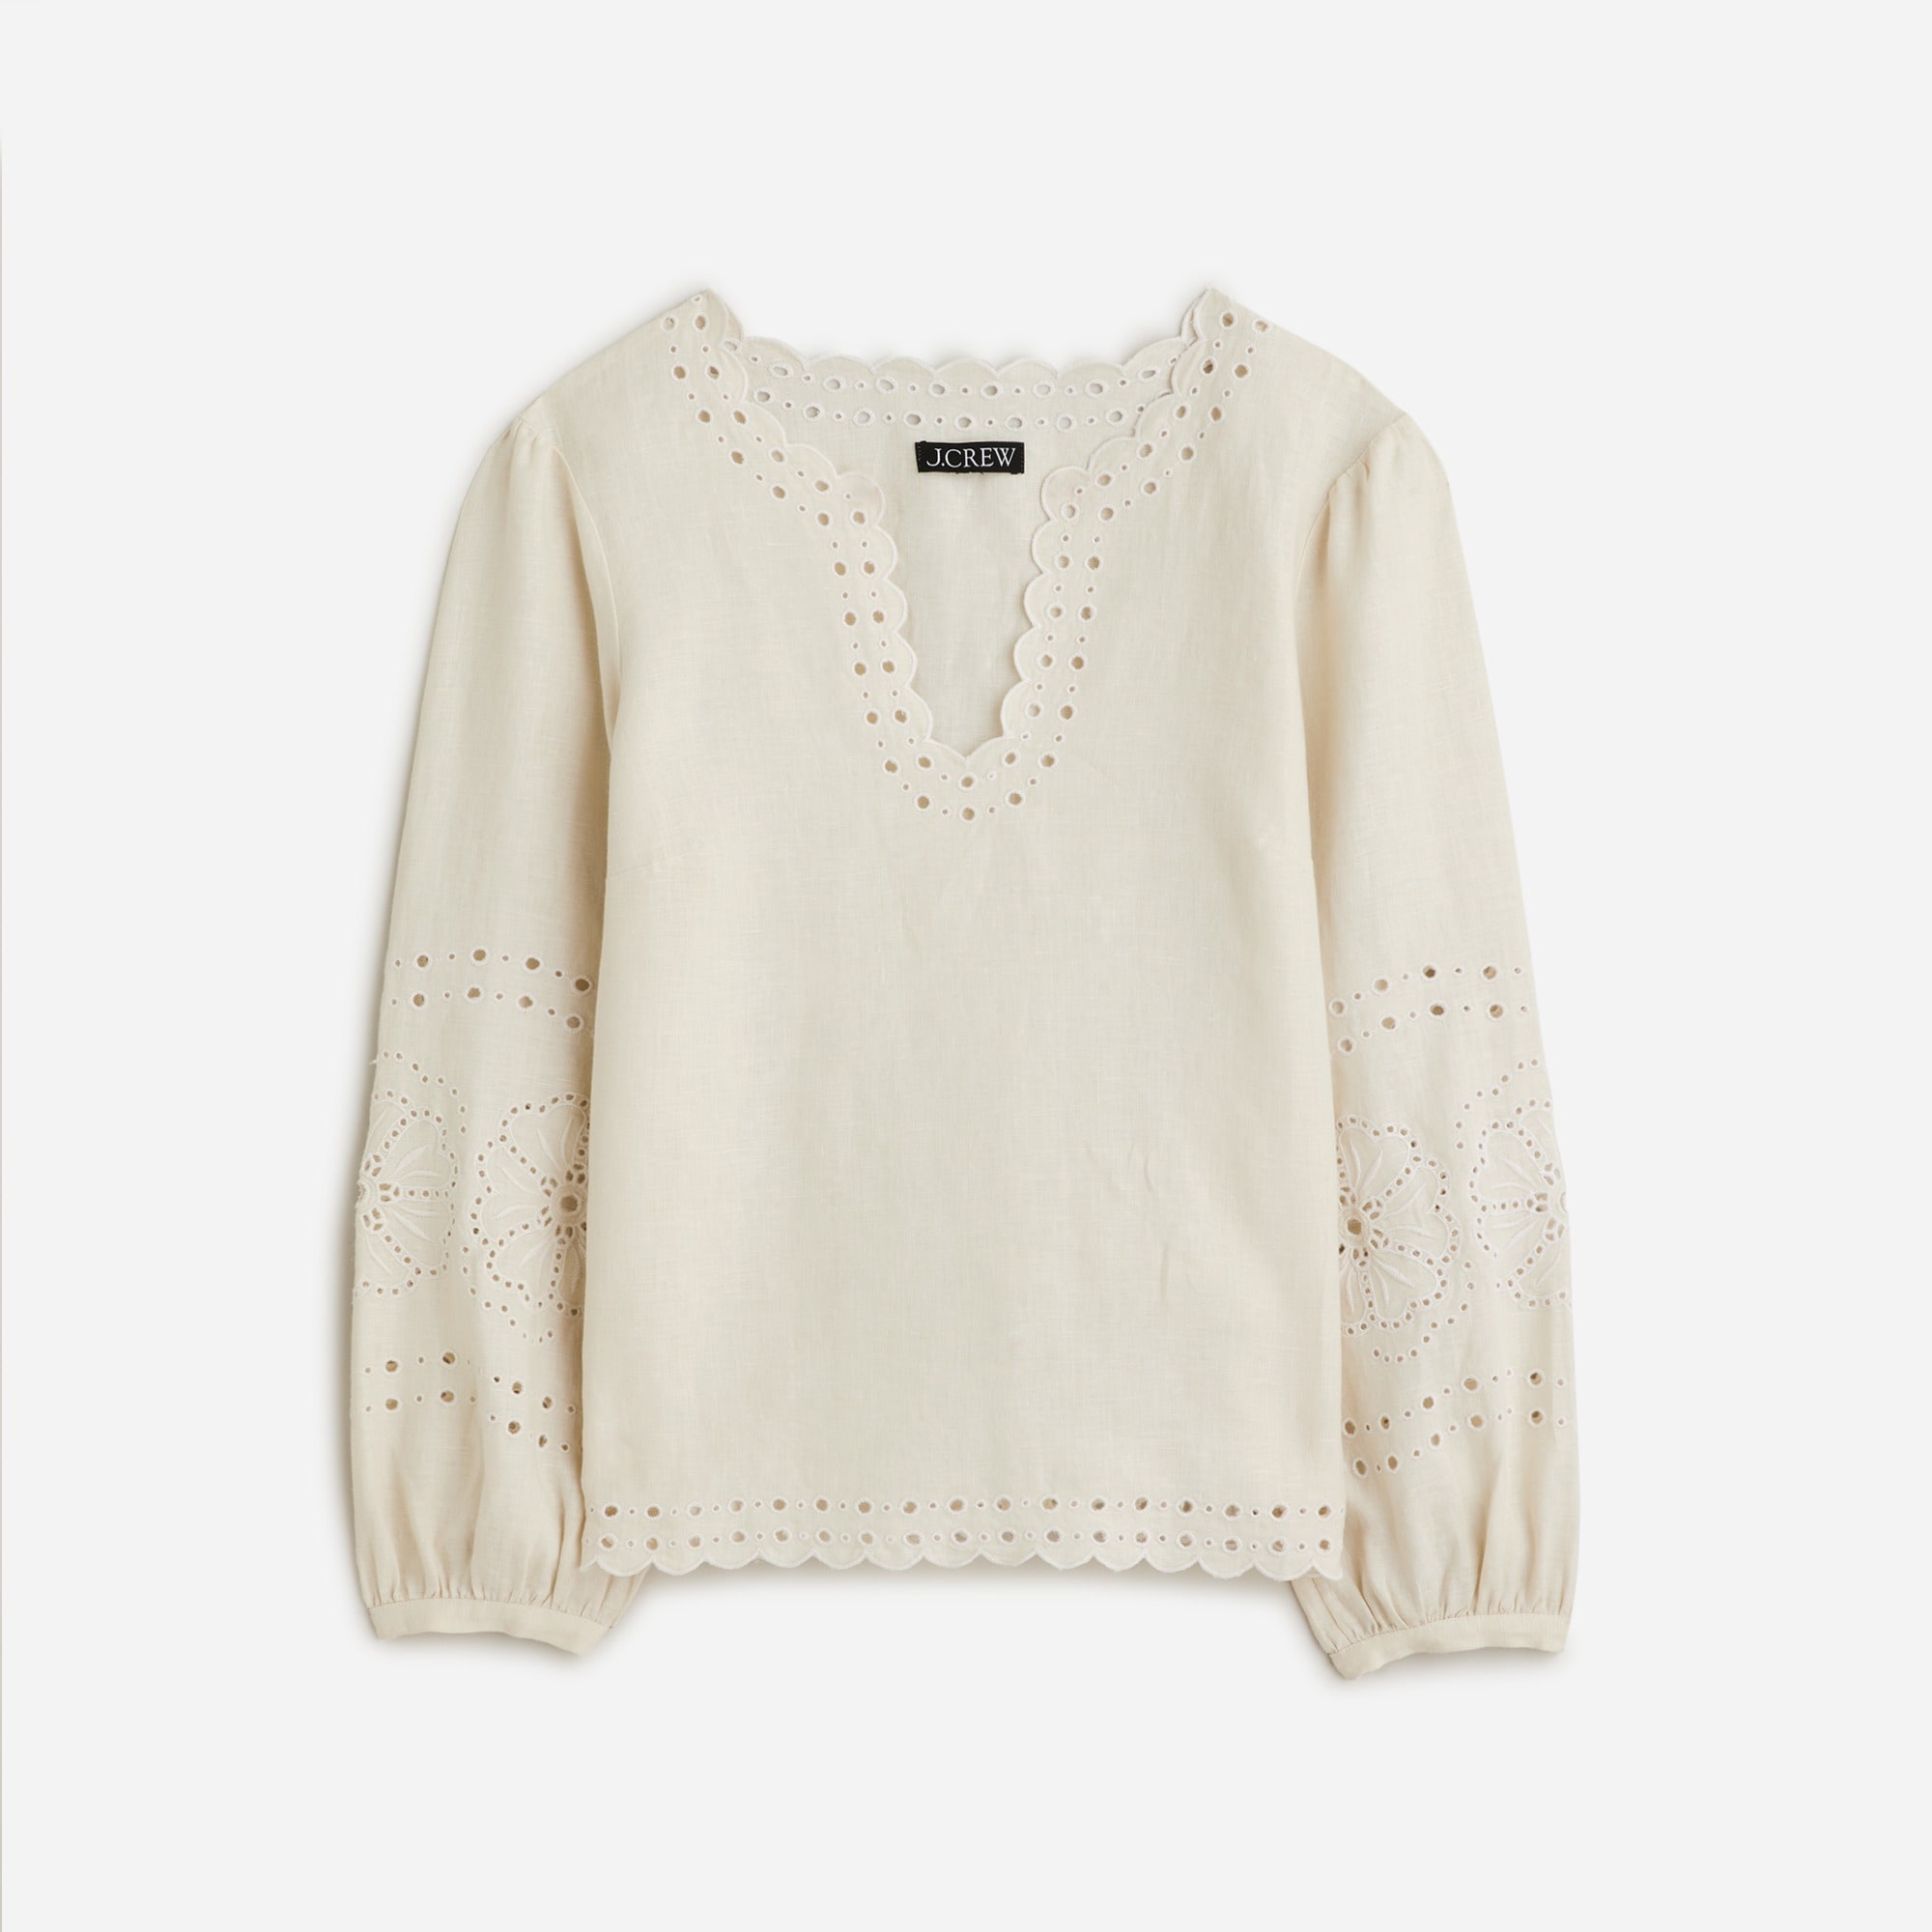 Jcrew Bungalow embroidered top in linen